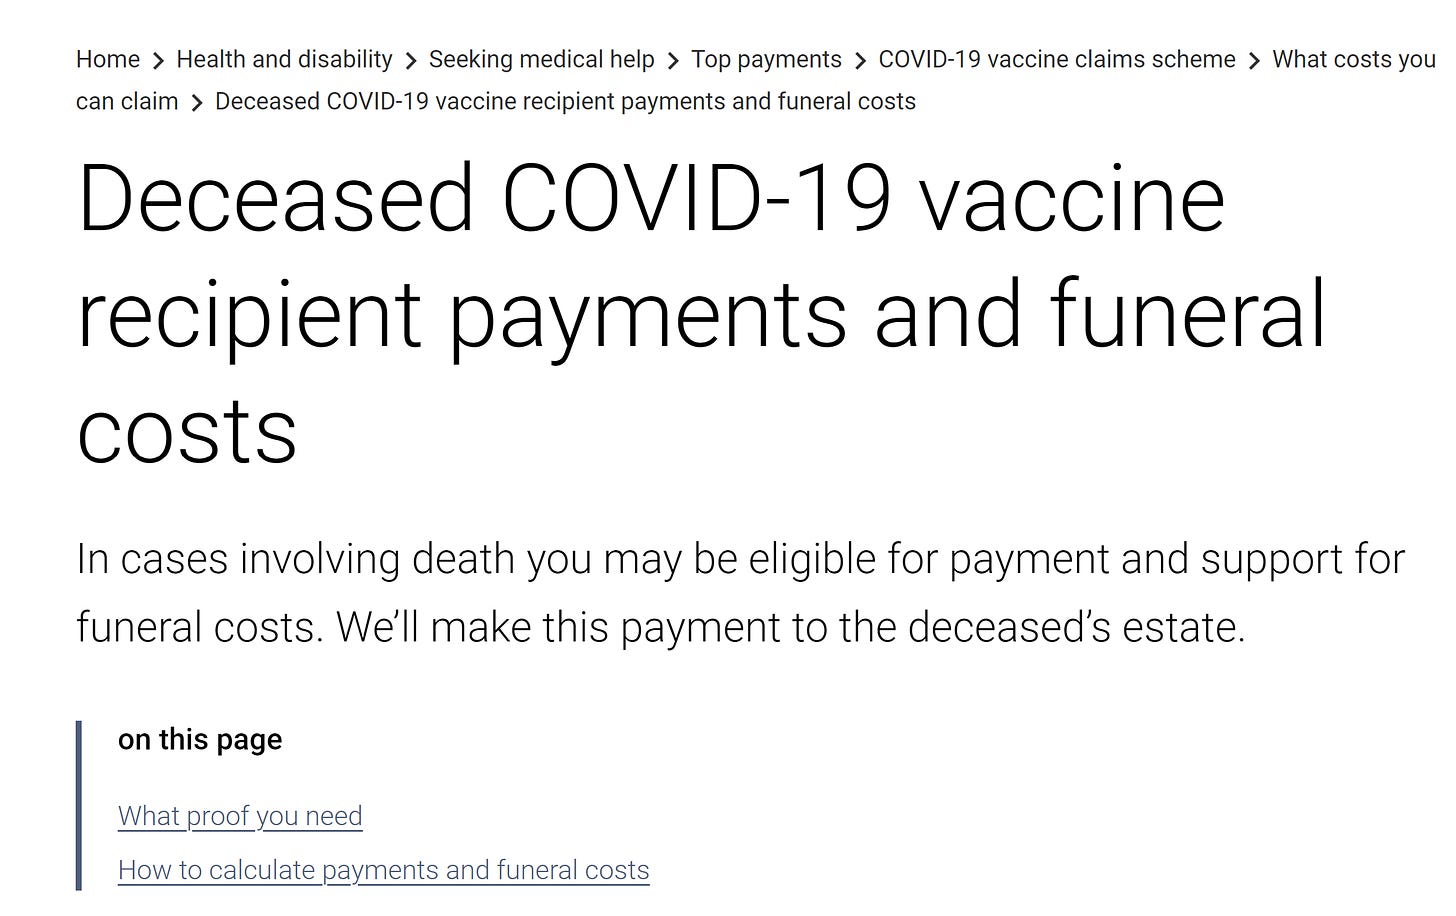 Australia has solved the vaccine hesitancy problem: they offer a free funeral gift card with your vaccine Https%3A%2F%2Fbucketeer-e05bbc84-baa3-437e-9518-adb32be77984.s3.amazonaws.com%2Fpublic%2Fimages%2F88c95f7d-7fb4-46eb-811a-adf2b76483e5_2425x1525